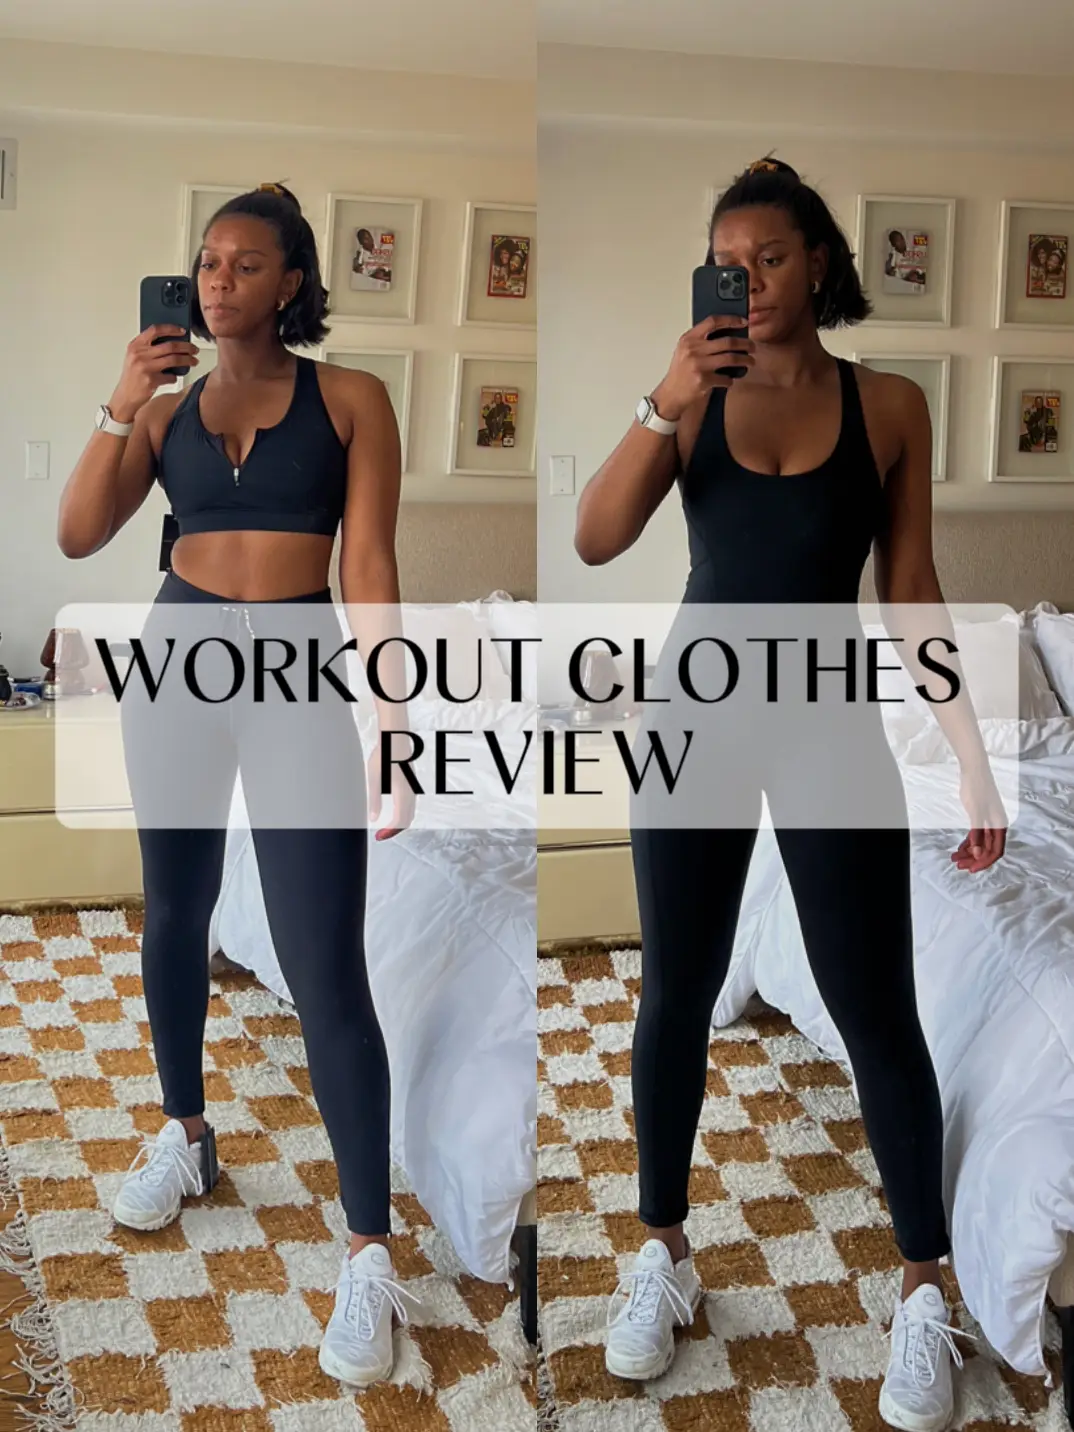 WORKOUT CLOTHES REVIEW, BAIR, Gallery posted by KEEKS✨